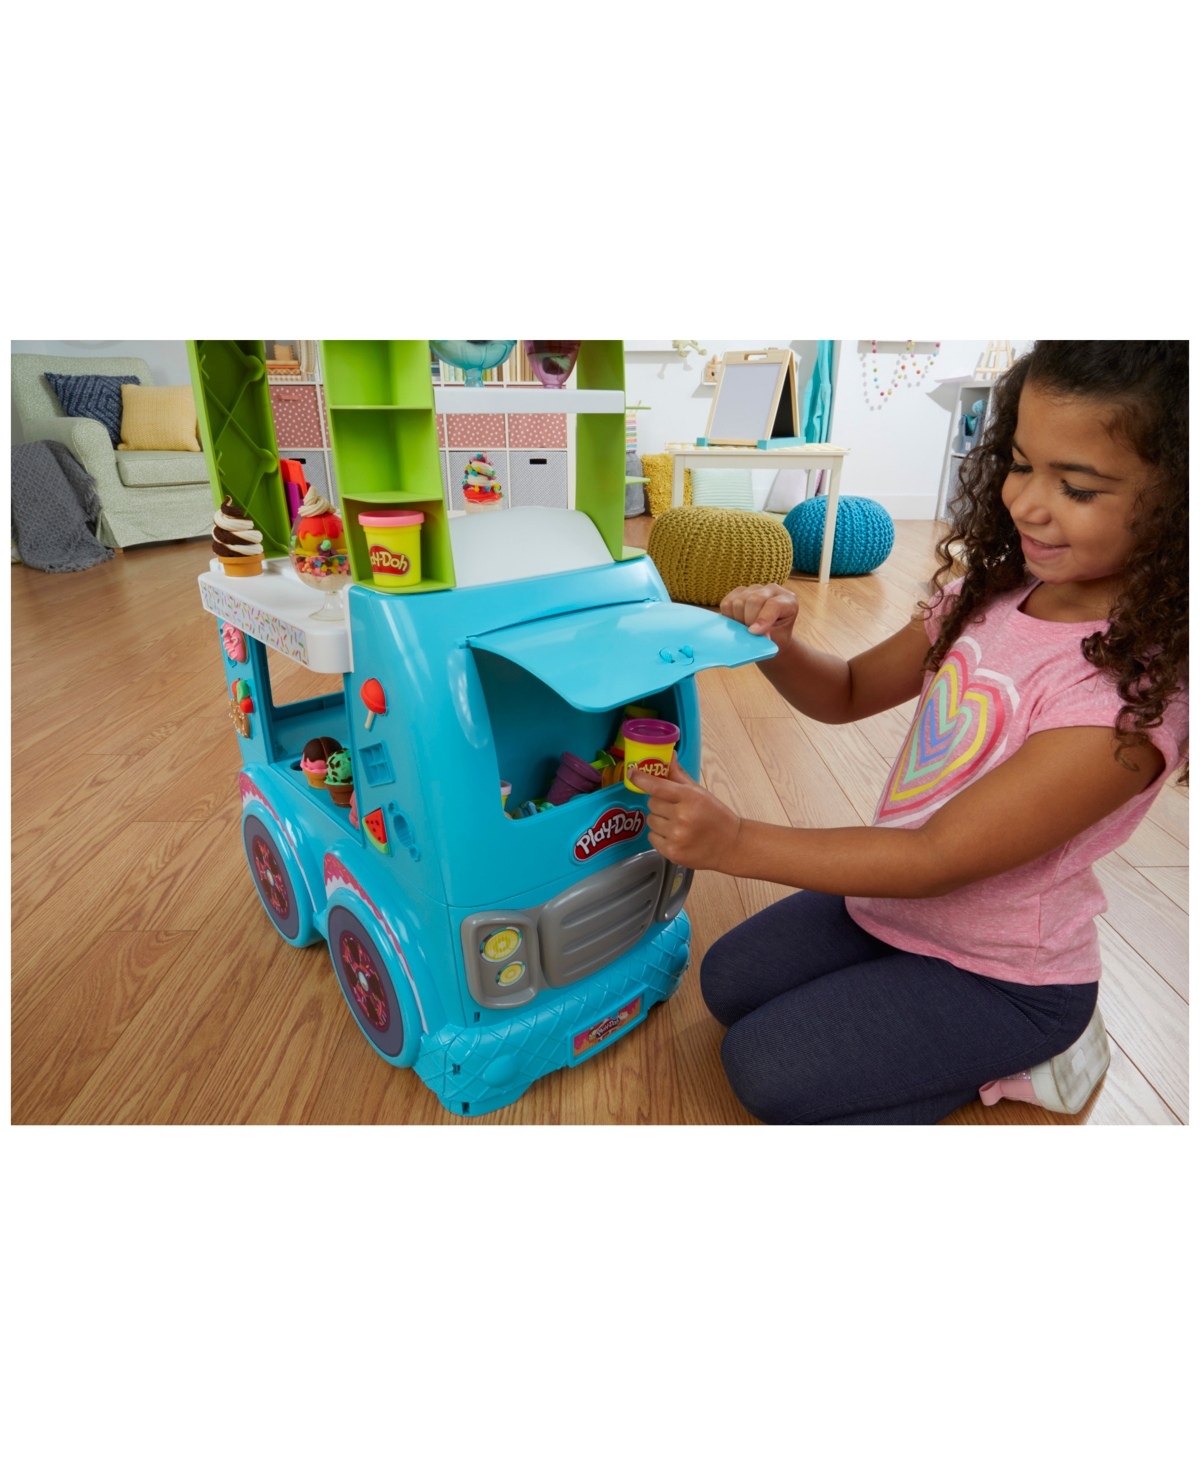 Play-Doh Kitchen Creations Ice Cream Truck Toy Playset for Kids, 20 Play  Kitchen Accessories, 5 Colors, Preschool Toys for 3 Year Old Girls and Boys